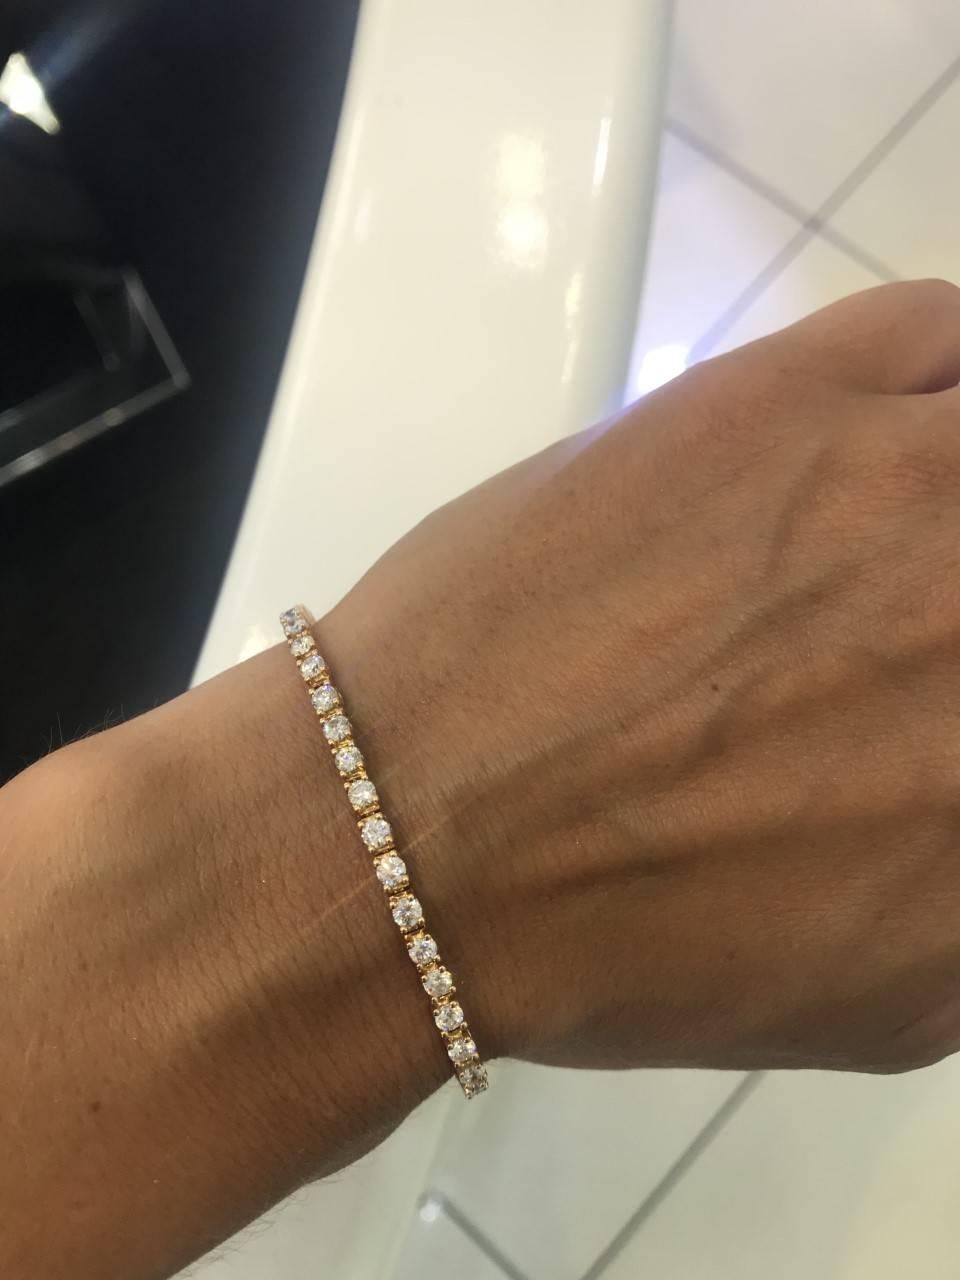 A classic piece that stands the test of time, enjoy the ultimate in luxury and beauty with this gorgeous diamond tennis bracelet, featuring 3.00 Carat of dazzling White Color G/H Clarity SI1 Round Brilliant Cut diamonds beautifully held in a classic